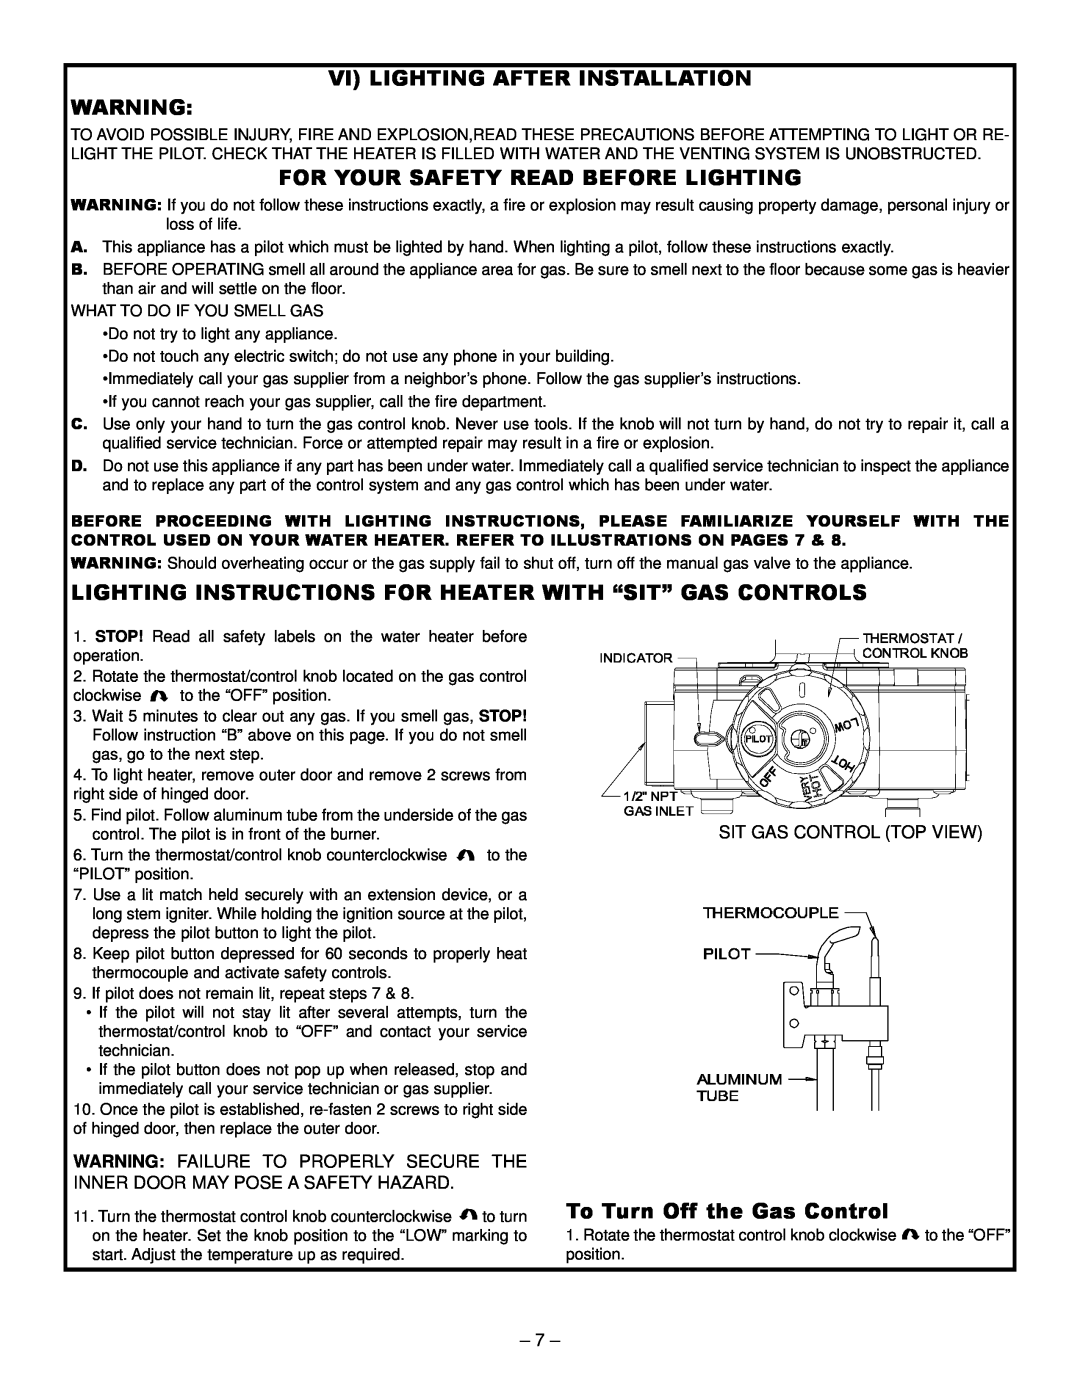 GSW PART NO.70999 REV.G (03-12) operating instructions Vi Lighting After Installation, For Your Safety Read Before Lighting 